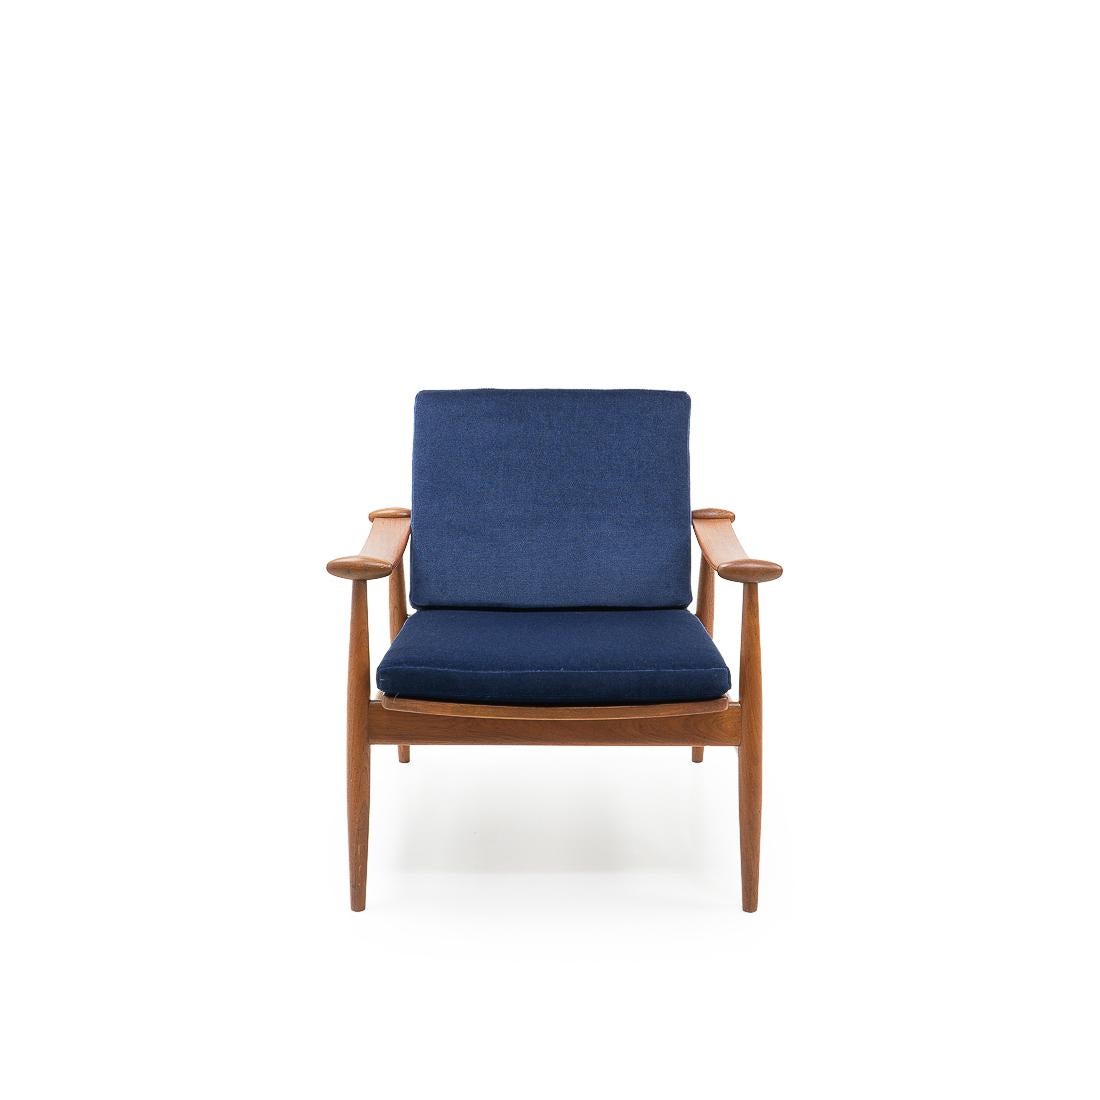 Finn Juhl, a Danish architect born in 1912, started his own practice in 1945 where he specialized in designing both interiors and furniture. His works were of high standard and technologically advanced for the time. He was also known for working